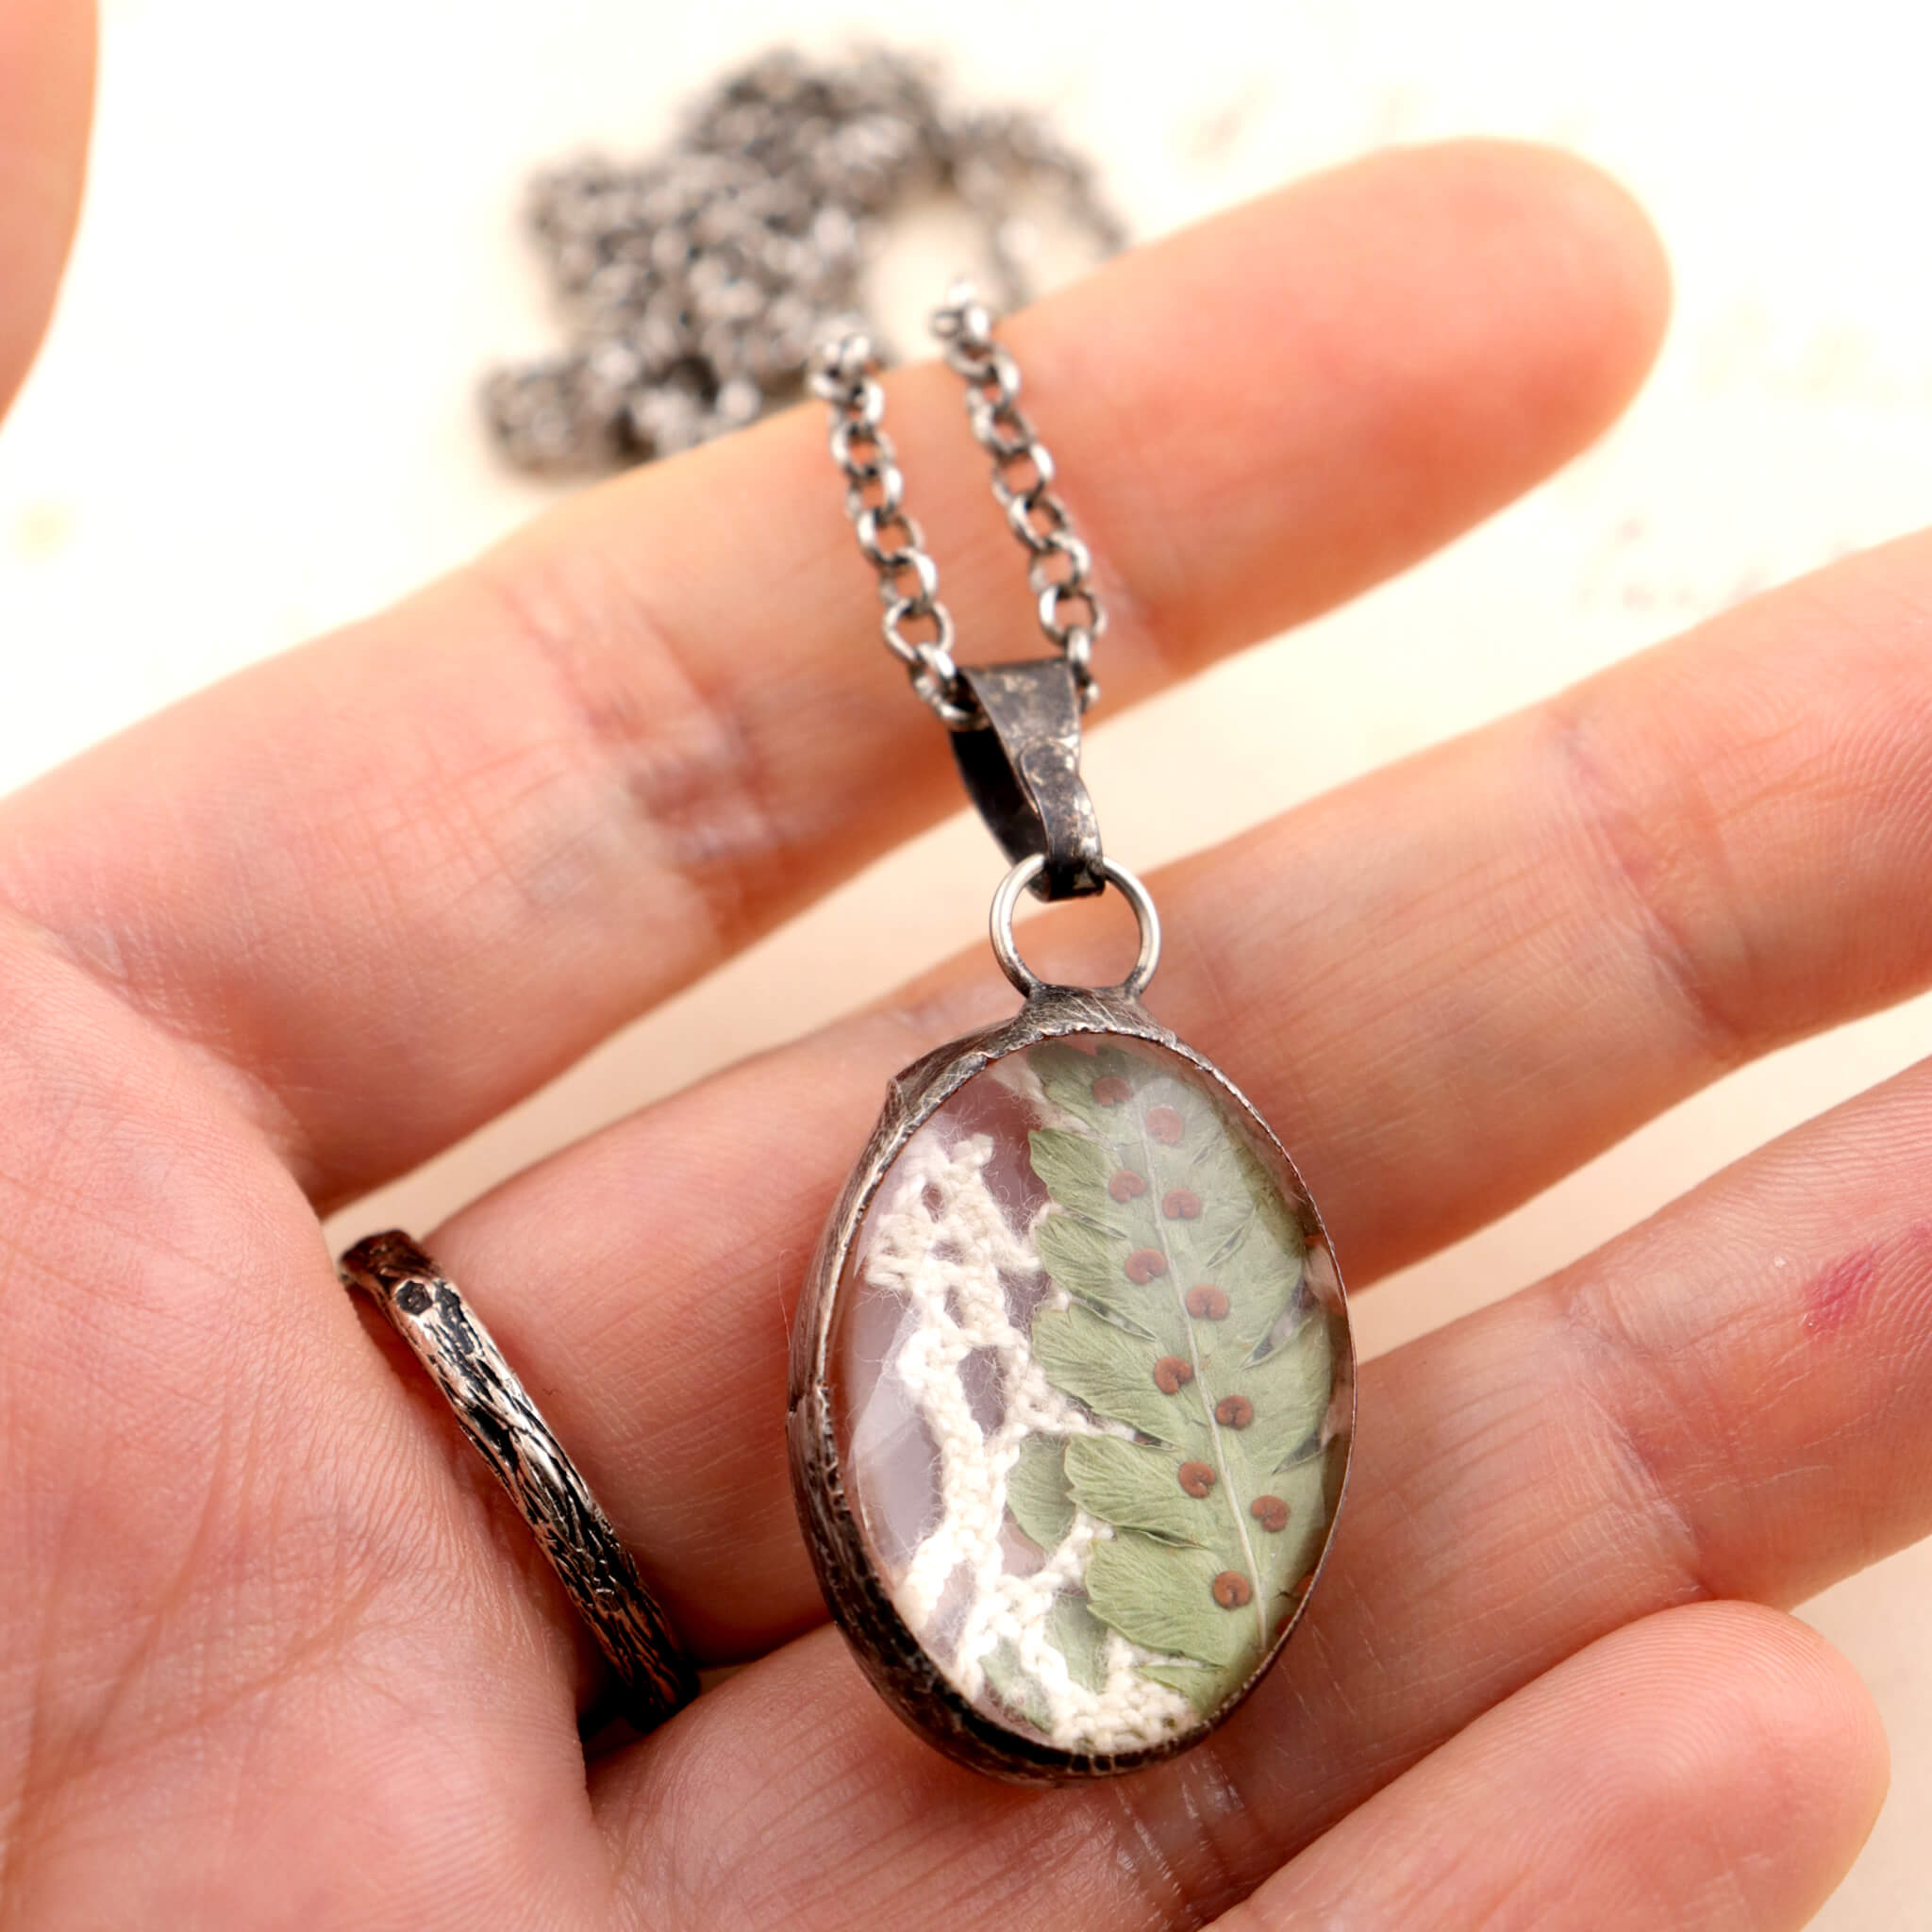 Hand holding oval necklace with real fern